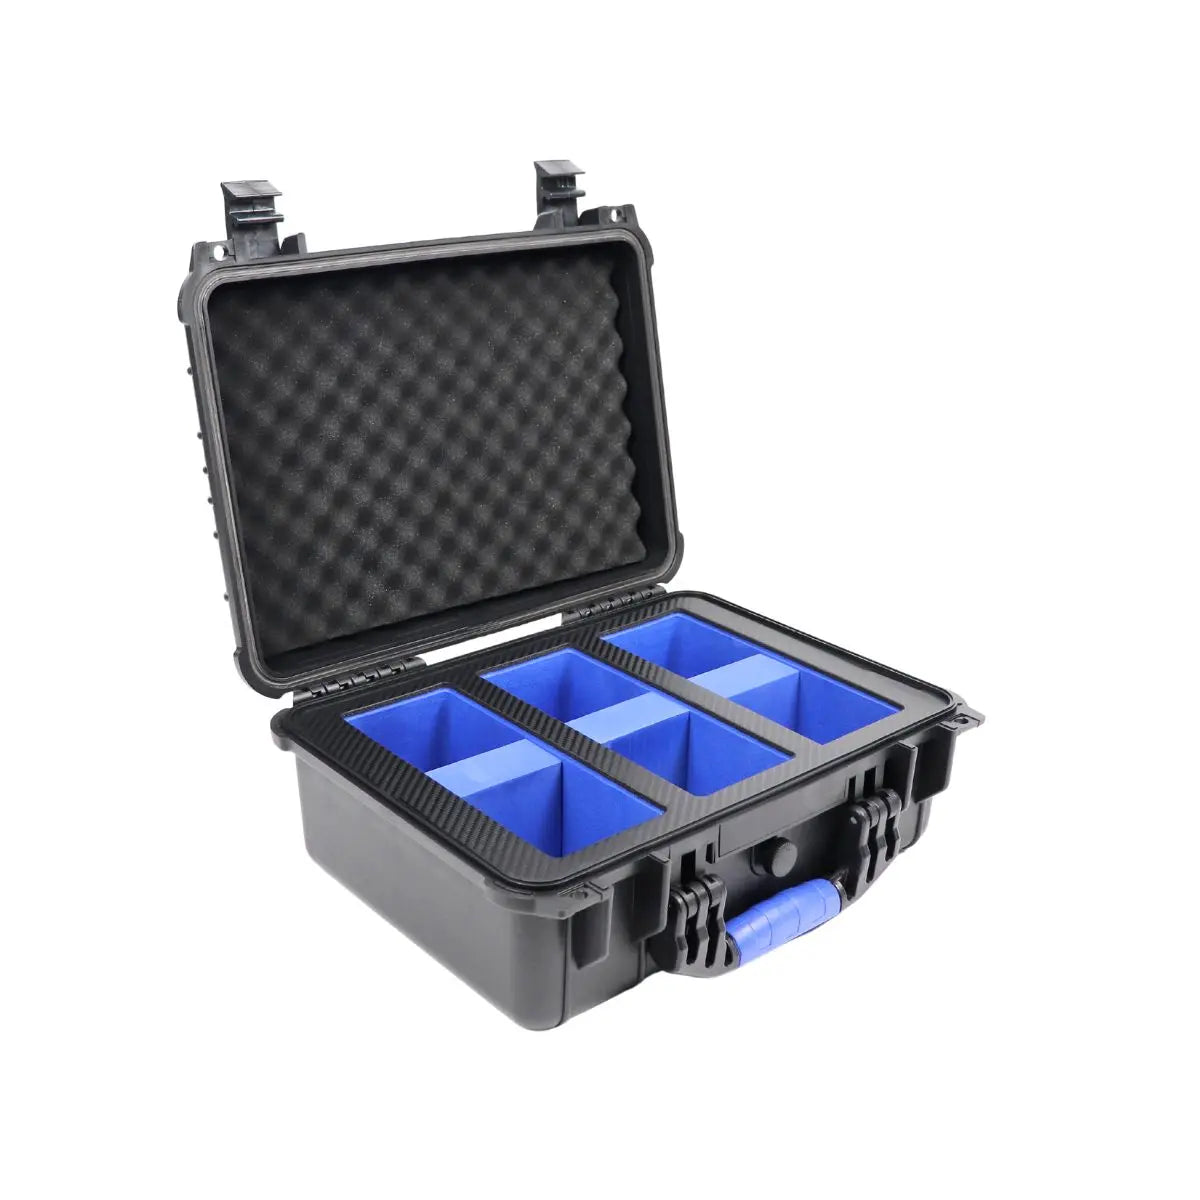 Z3 Pro Slab Case Waterproof 3 Row Graded Card Storage Box | Protects PSA, SGC, BGS, Toploaders, Magnetic Holders & More